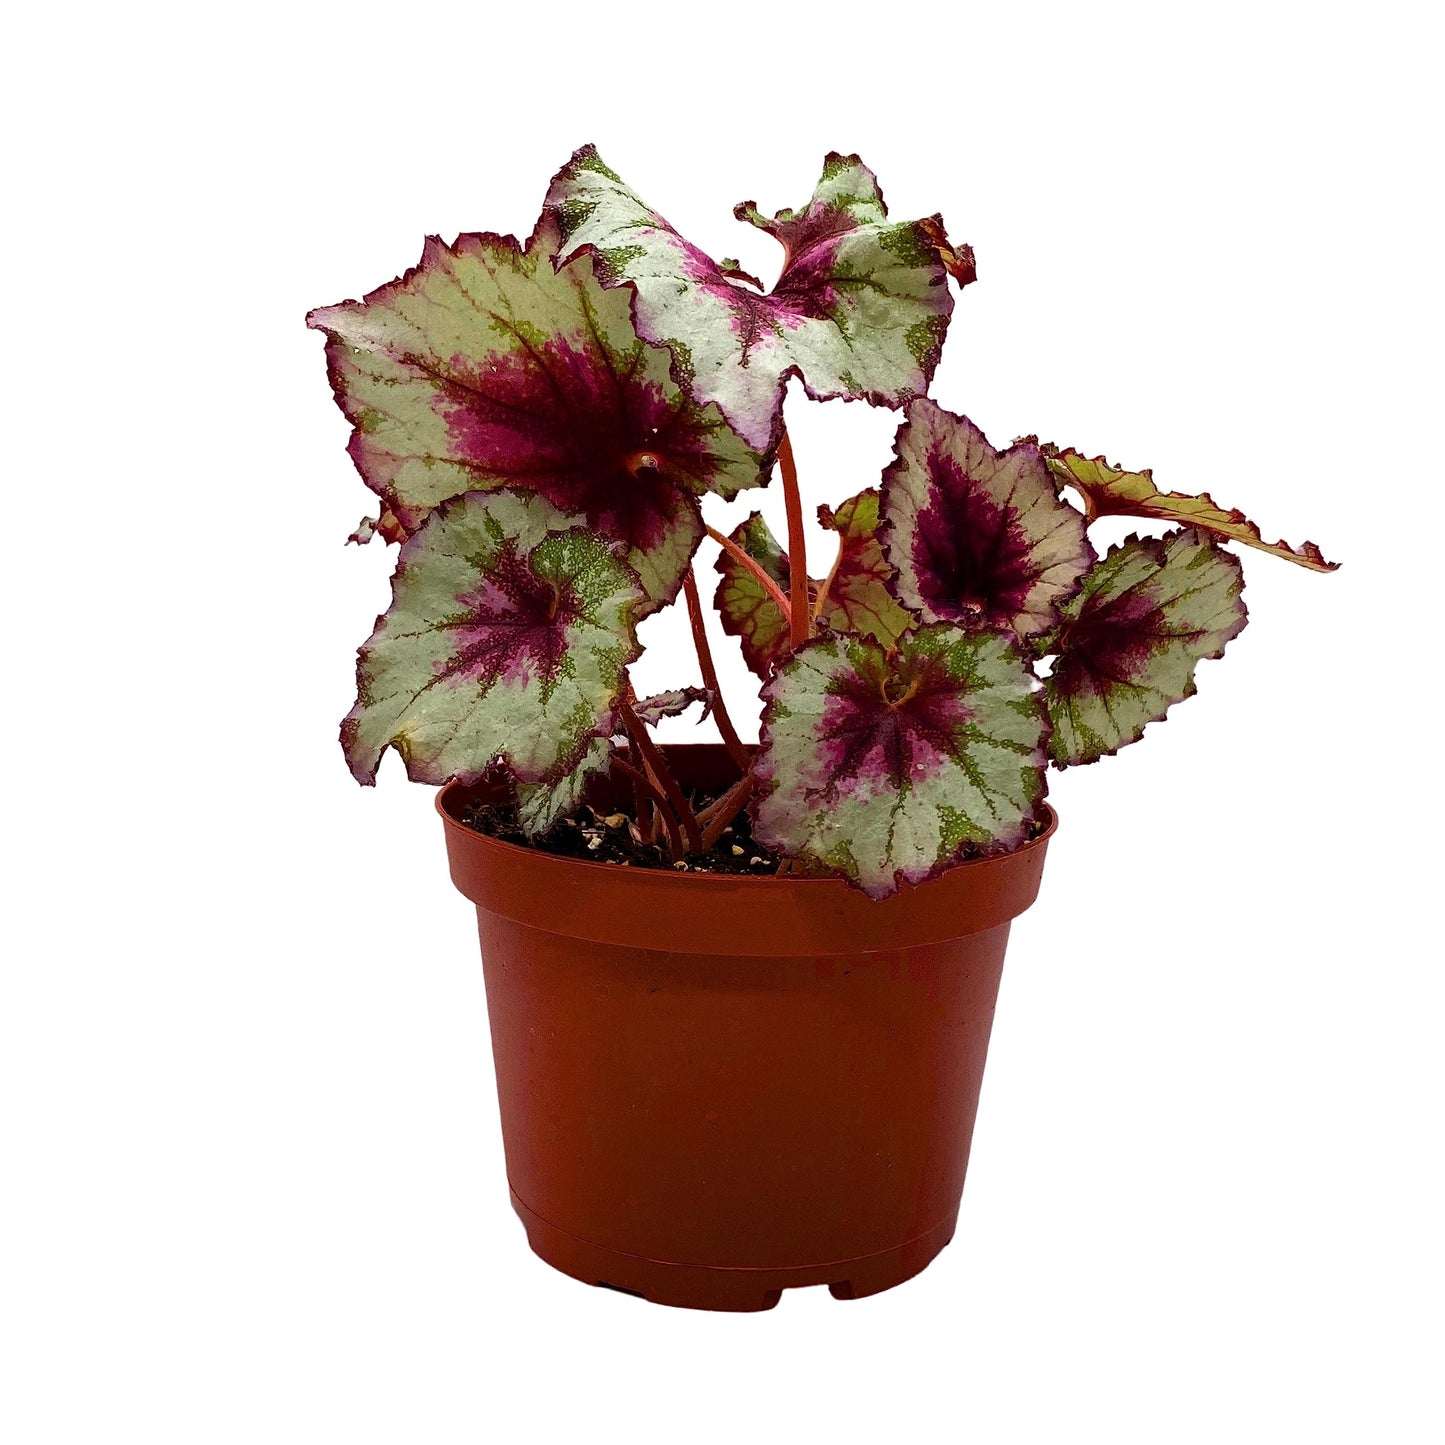 Harmony's BubbleBlooms Peppermint Twist Begonia, Red and White Spiral Leaf, Begonia Rex in 6 inch Pot